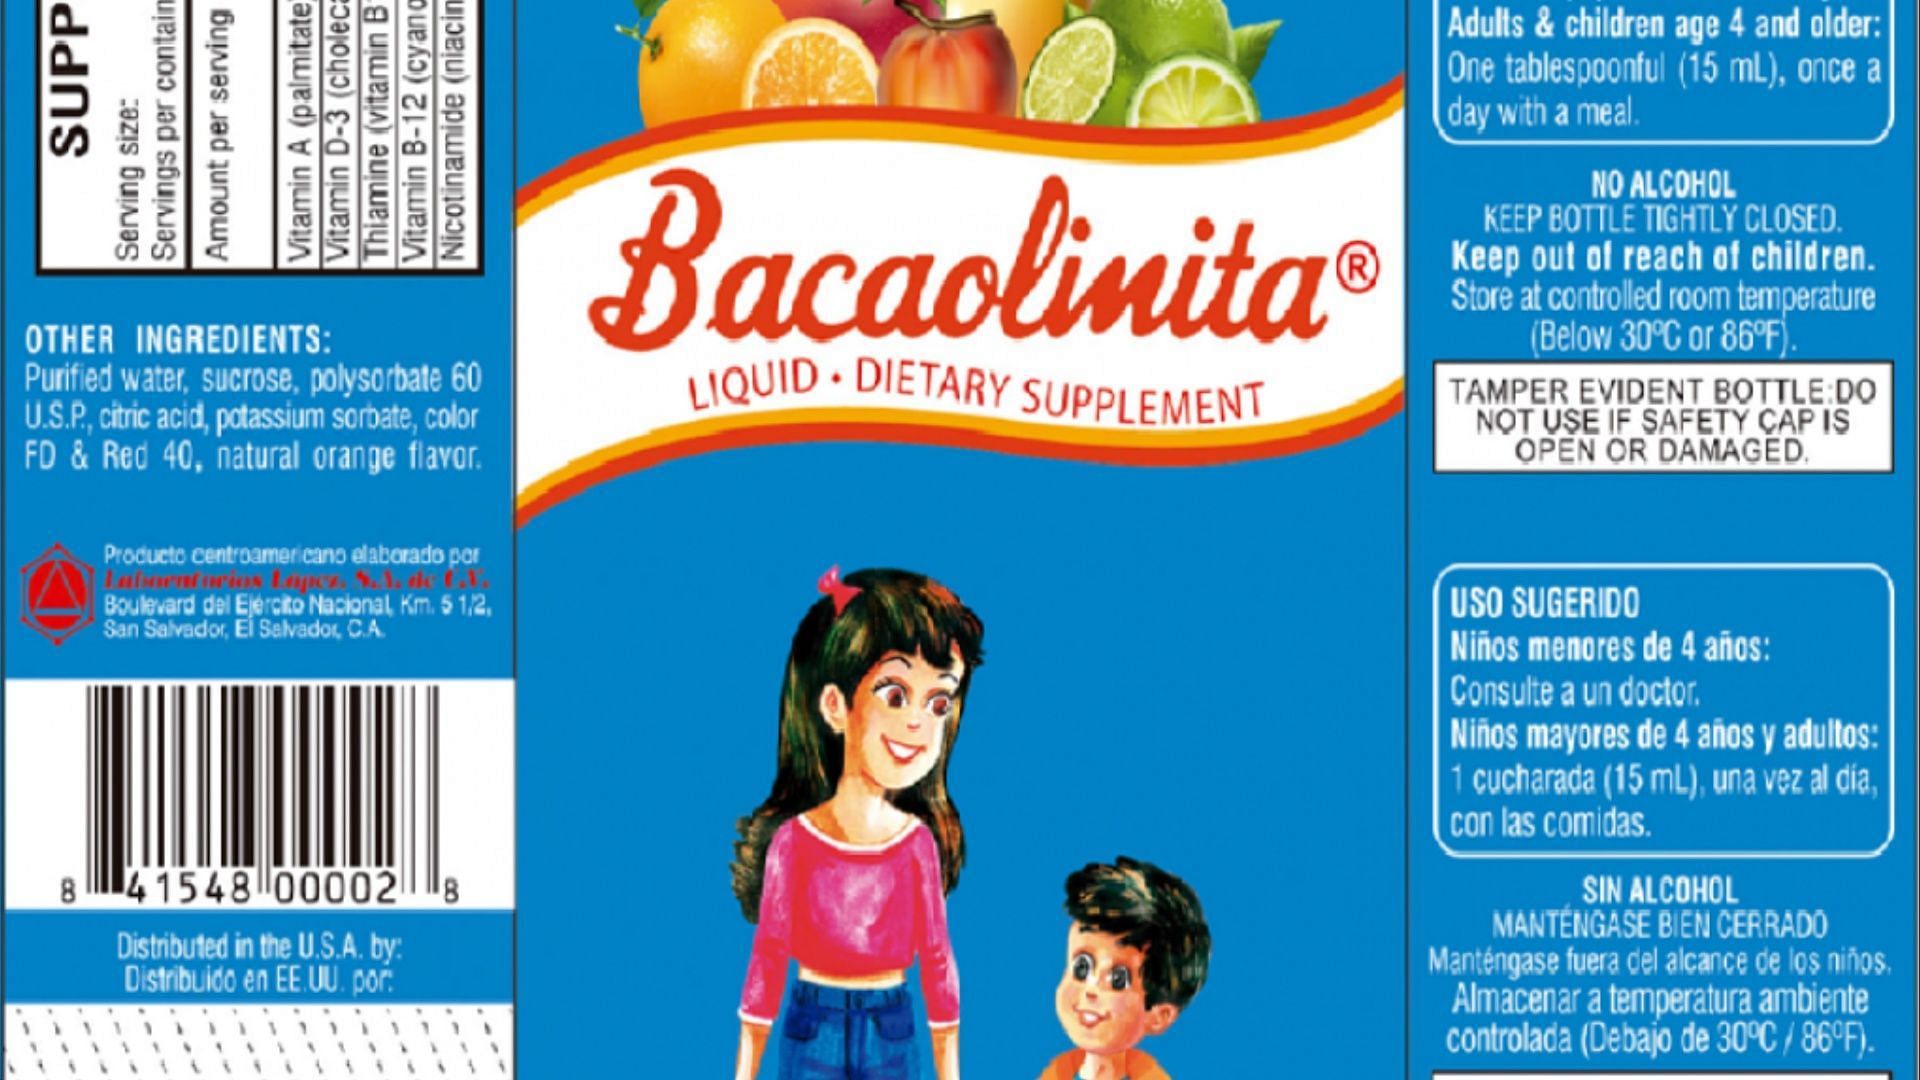 The recalled Laboratorios Lopez&#039;s Bacaolinita dietary supplement contains PEG-40 hydrogenated castor oil which may cause hypersensitivity reactions (Image via Food and Drug Administration)